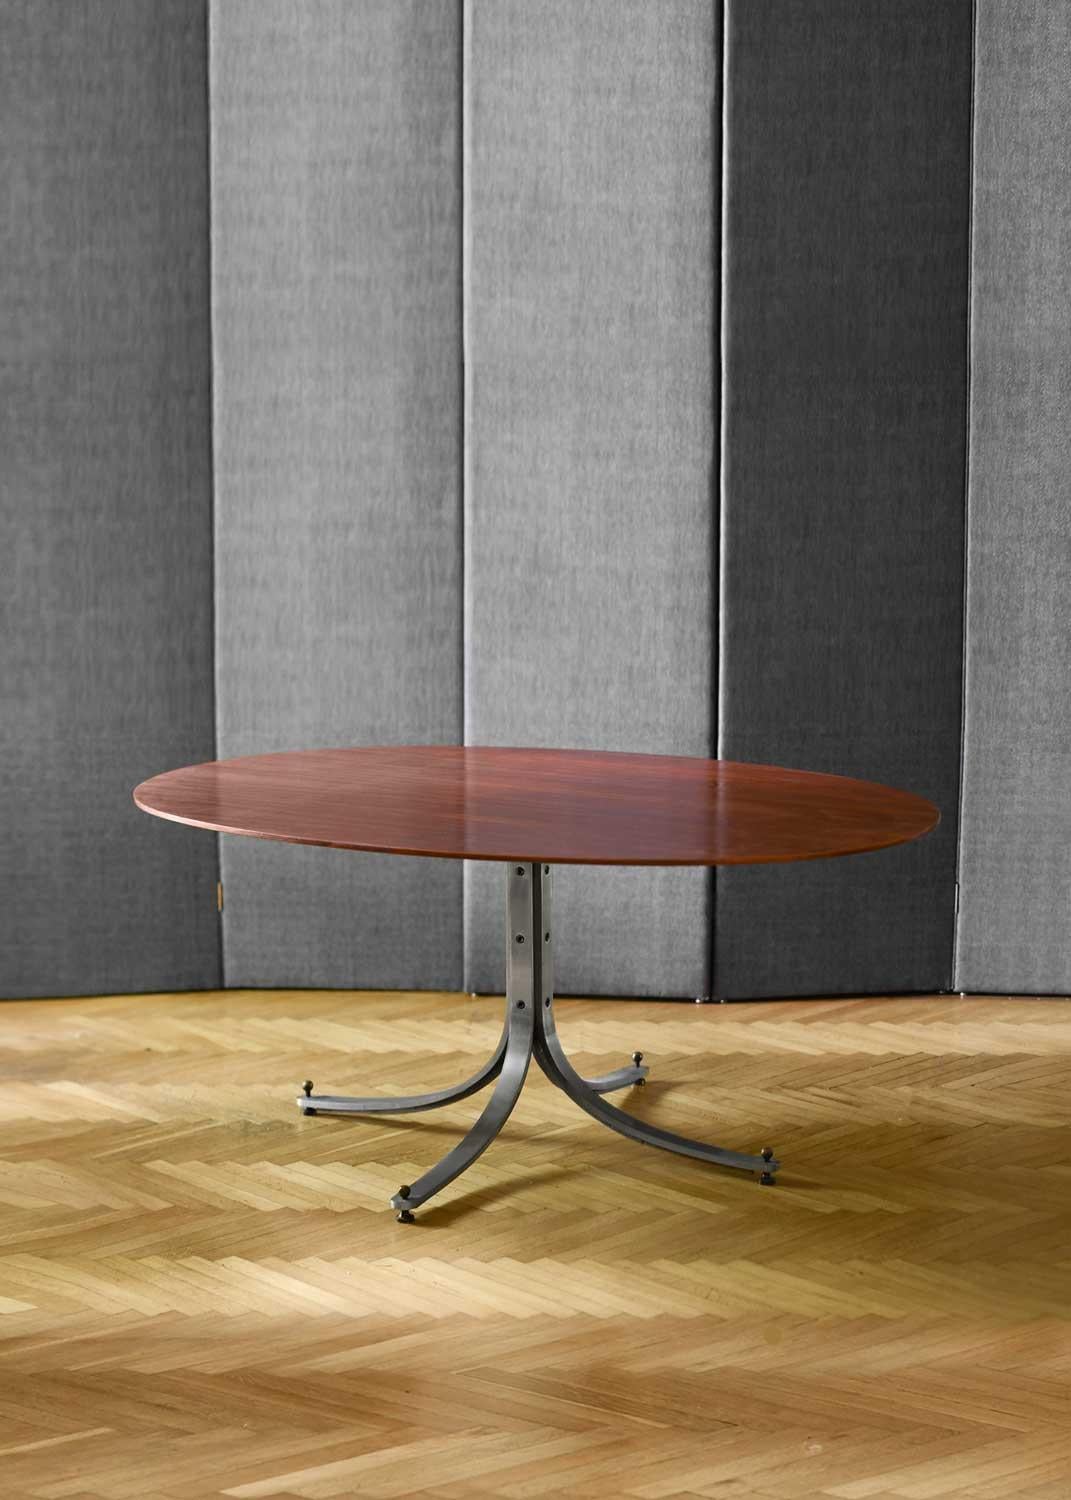 Midcentury table design Sergio Mazza for Arflex 1960 – with adjustable feet
Product details
Made of curved metal with wood top
Dimensions: 162w x 72h x 120d cm
Materials: wood, metal
Designer: Sergio Mazza for Arflex 1960.